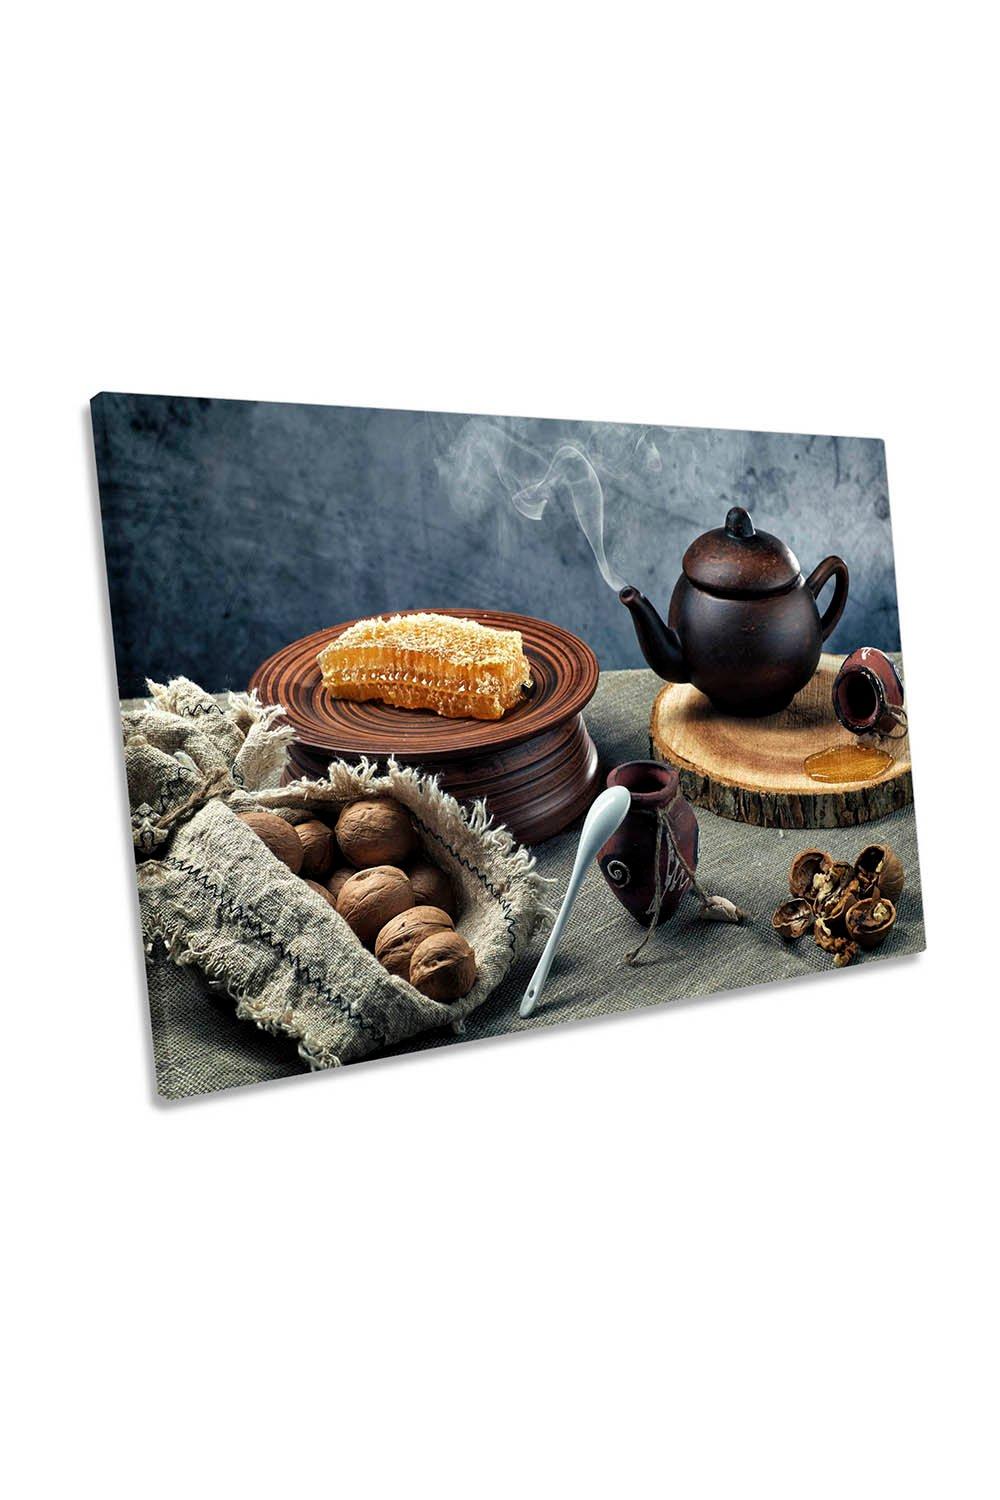 Tea Party Kitchen Rustic Canvas Wall Art Picture Print